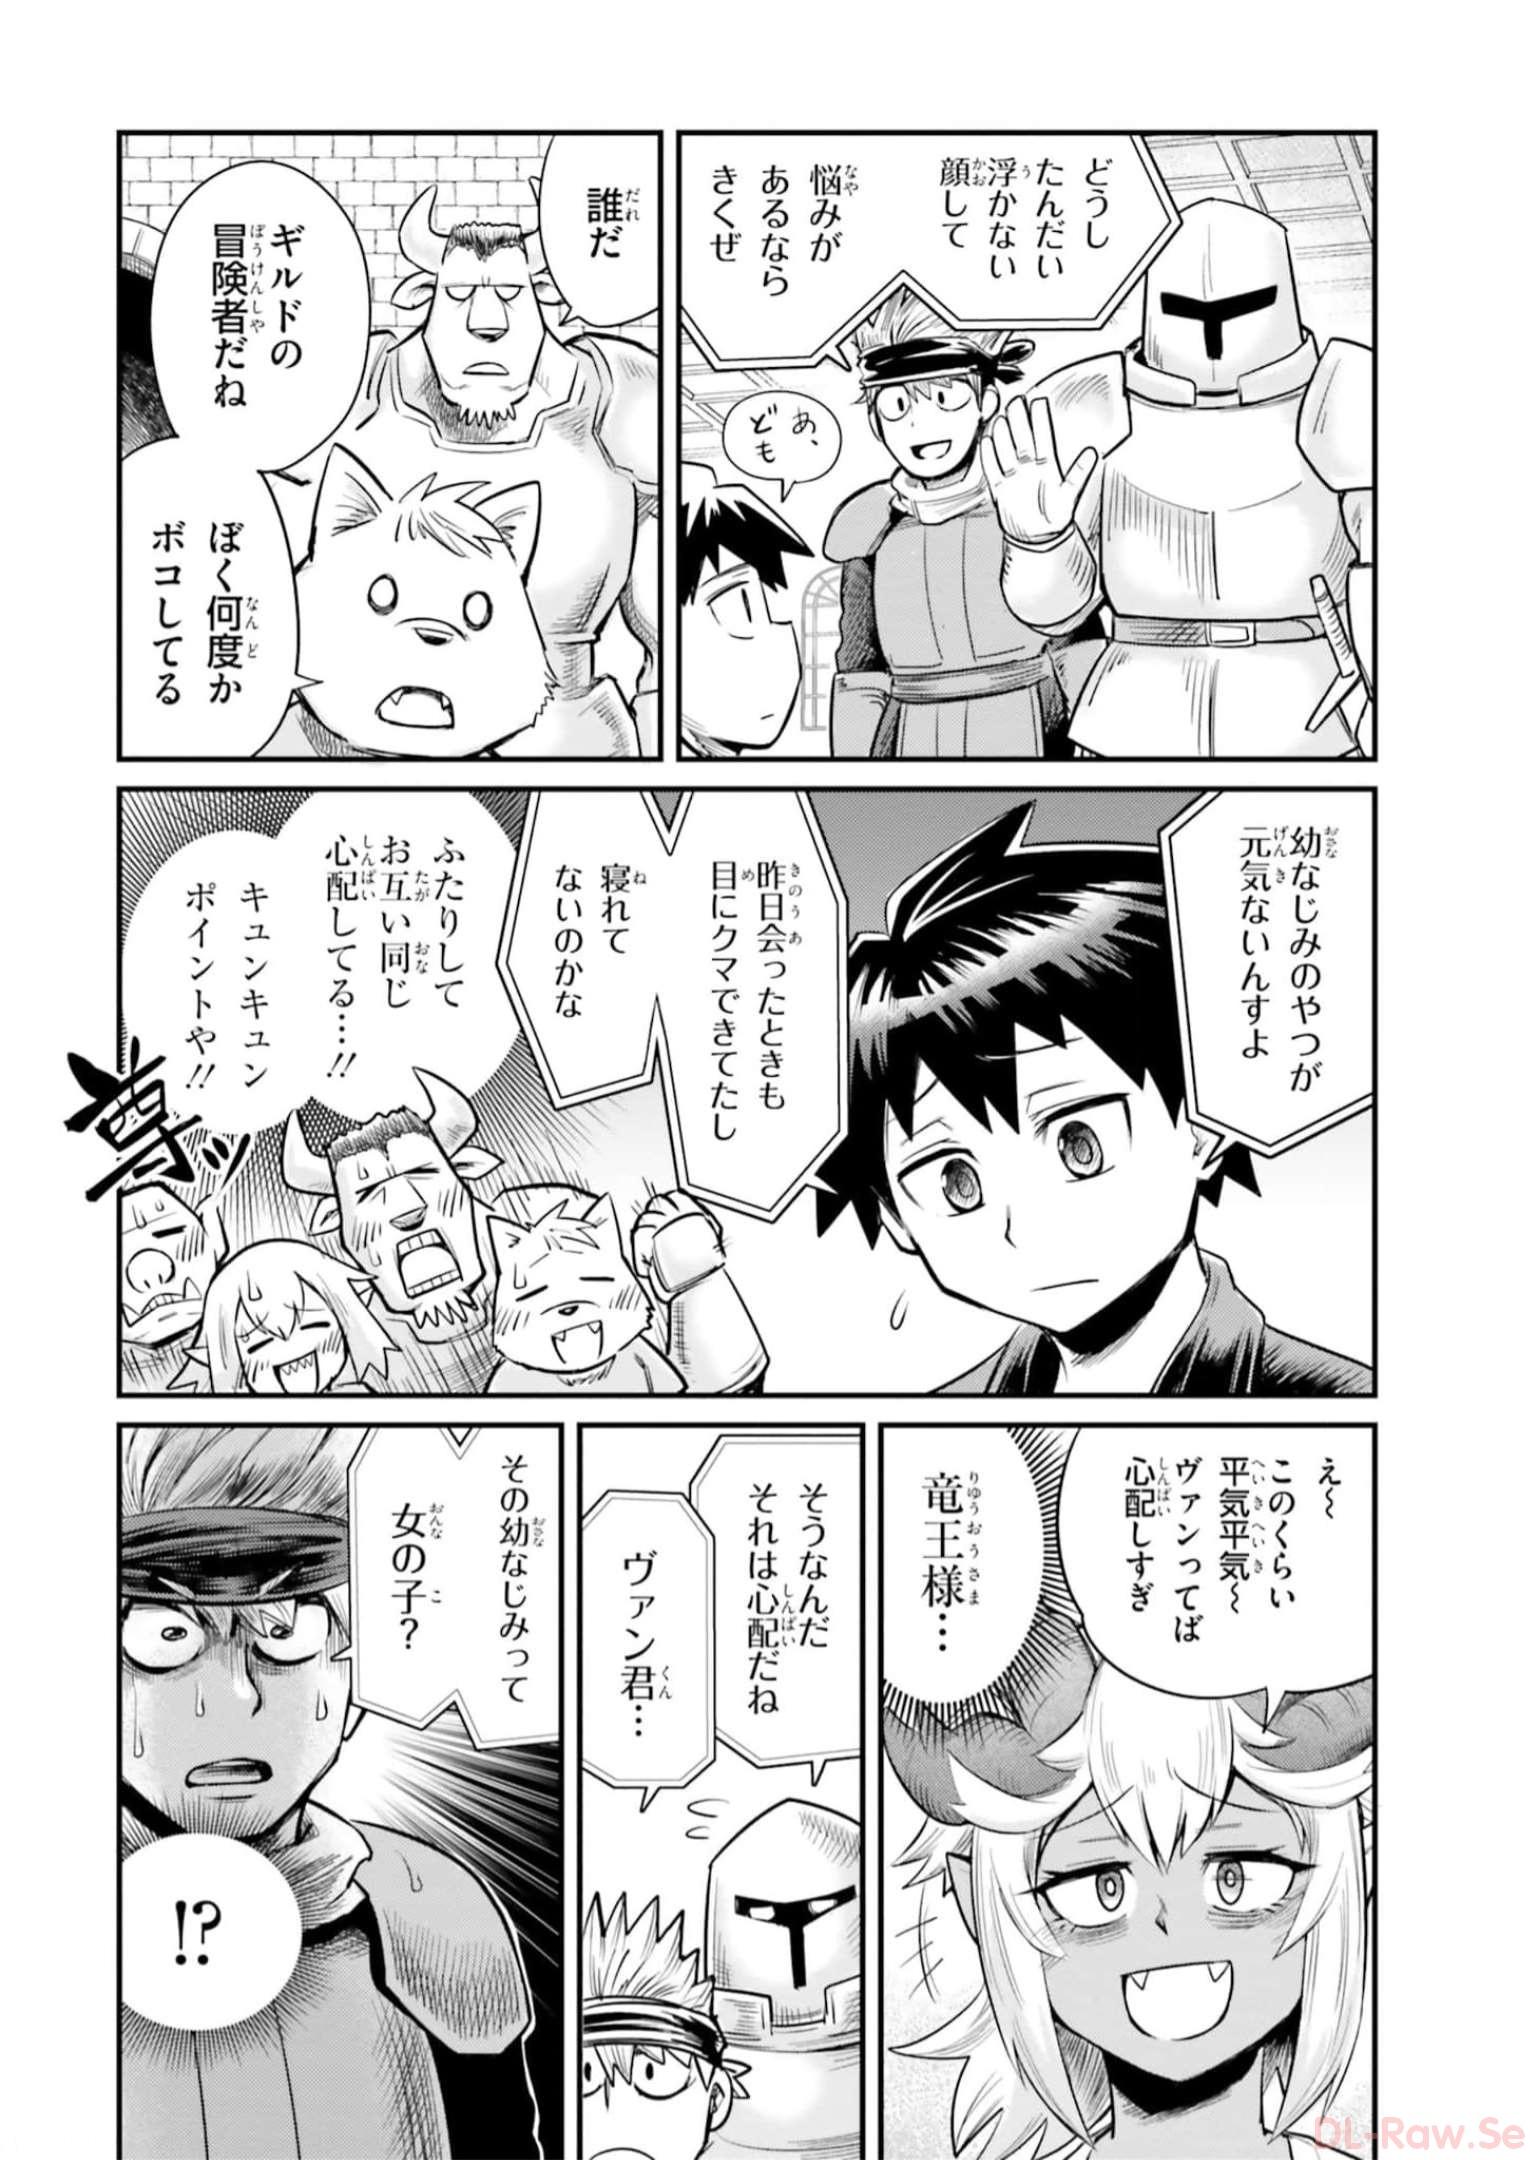 Dungeon Friends Forever Dungeon’s Childhood Friend ダンジョンの幼なじみ 第4話 - Page 10